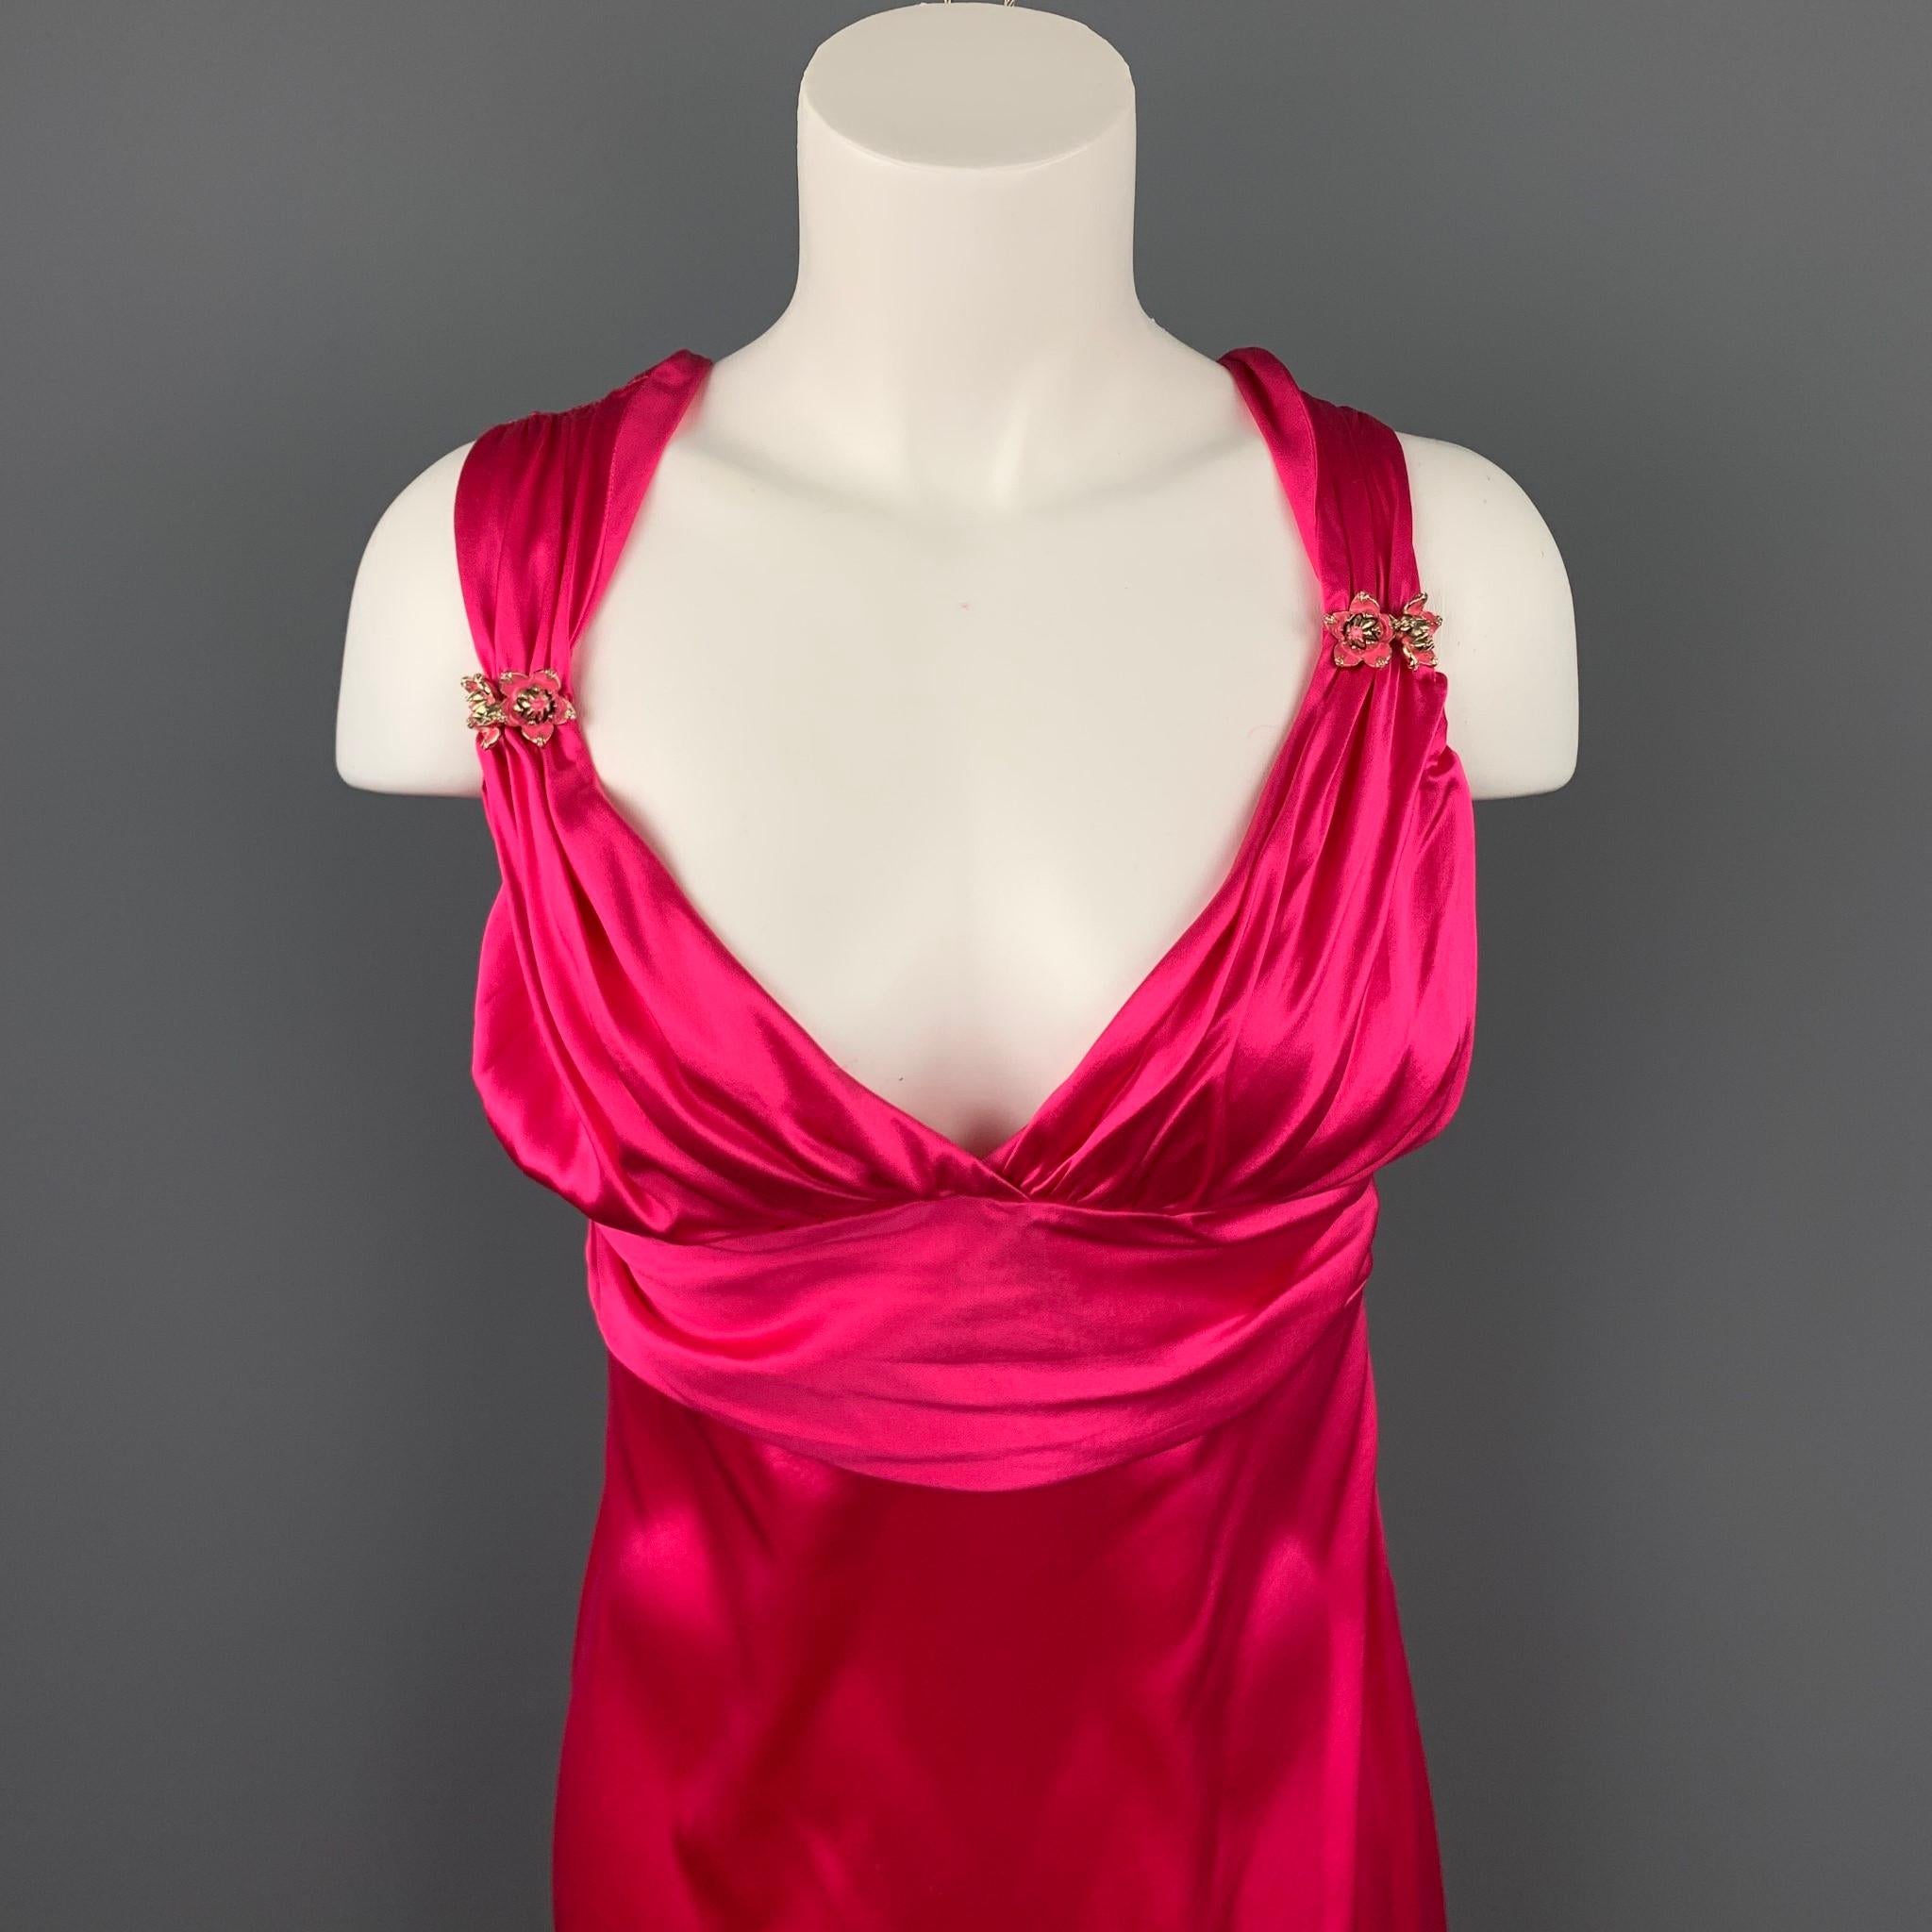 ROBERTO CAVALLI cocktail dress comes in a fuchsia satin silk featuring a sheath style, floral pin details, sleeveless, and a side zipper closure. Made in Italy.

Good Pre-Owned Condition.
Marked: IT 44
Original Retail Price: